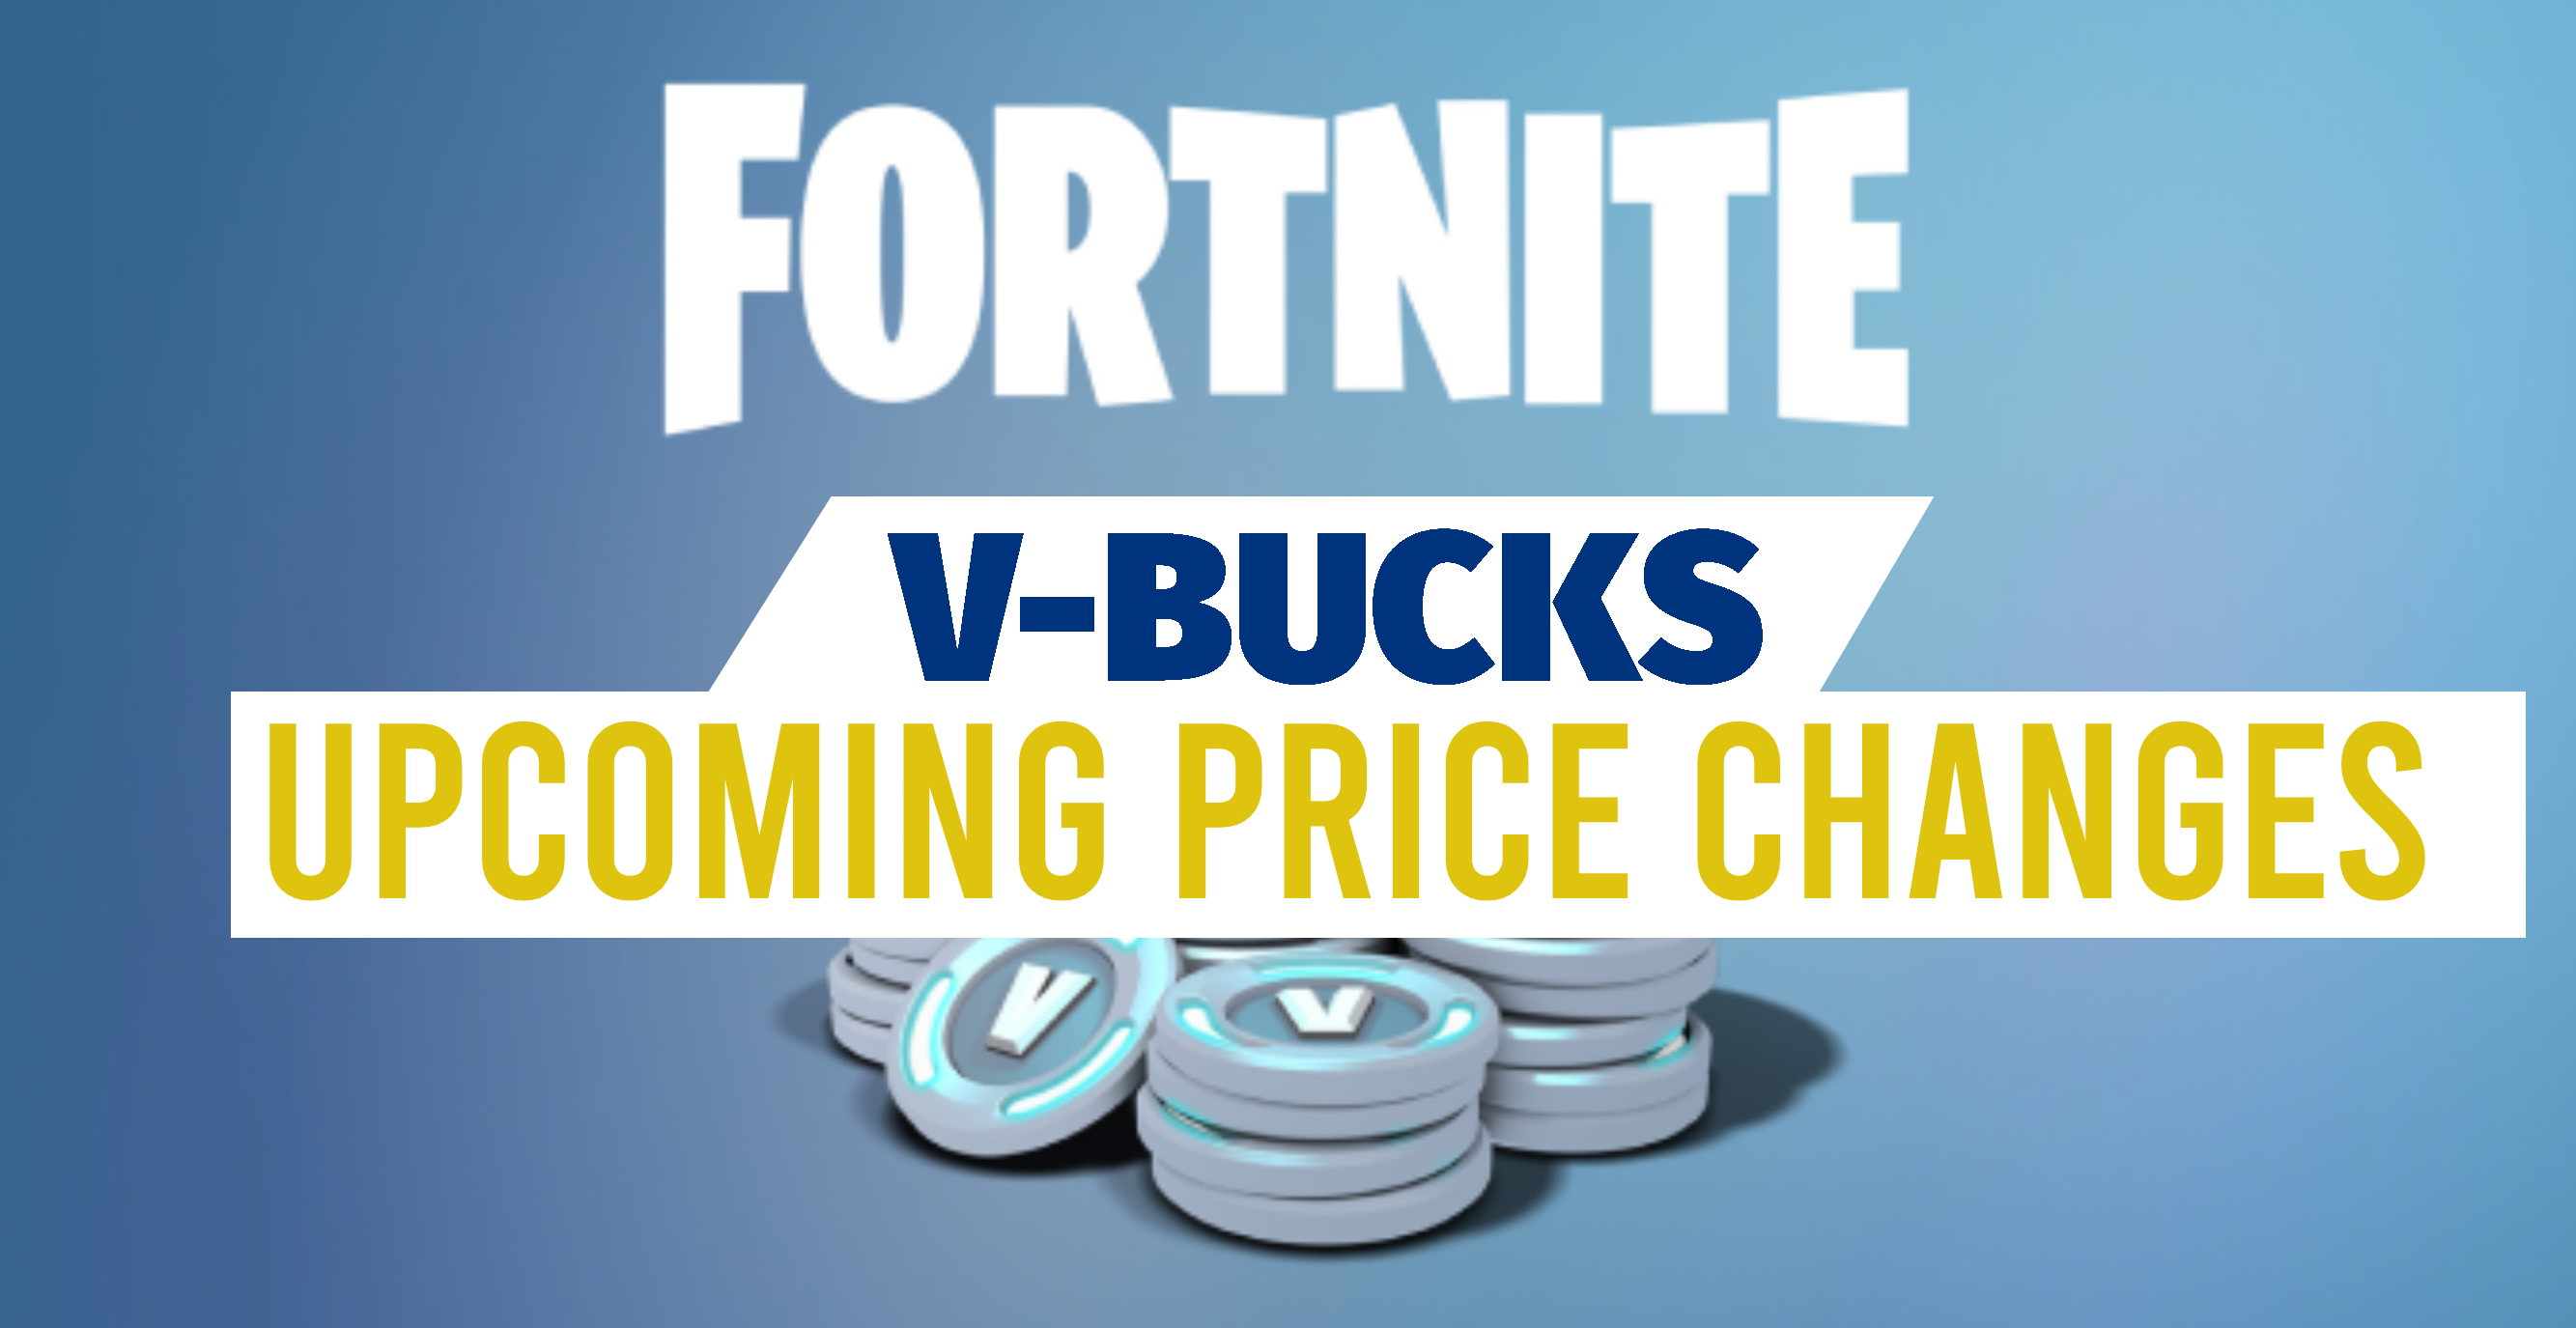 Fortnite's Upcoming V-Bucks Price Changes - The Game Statistics Authority 